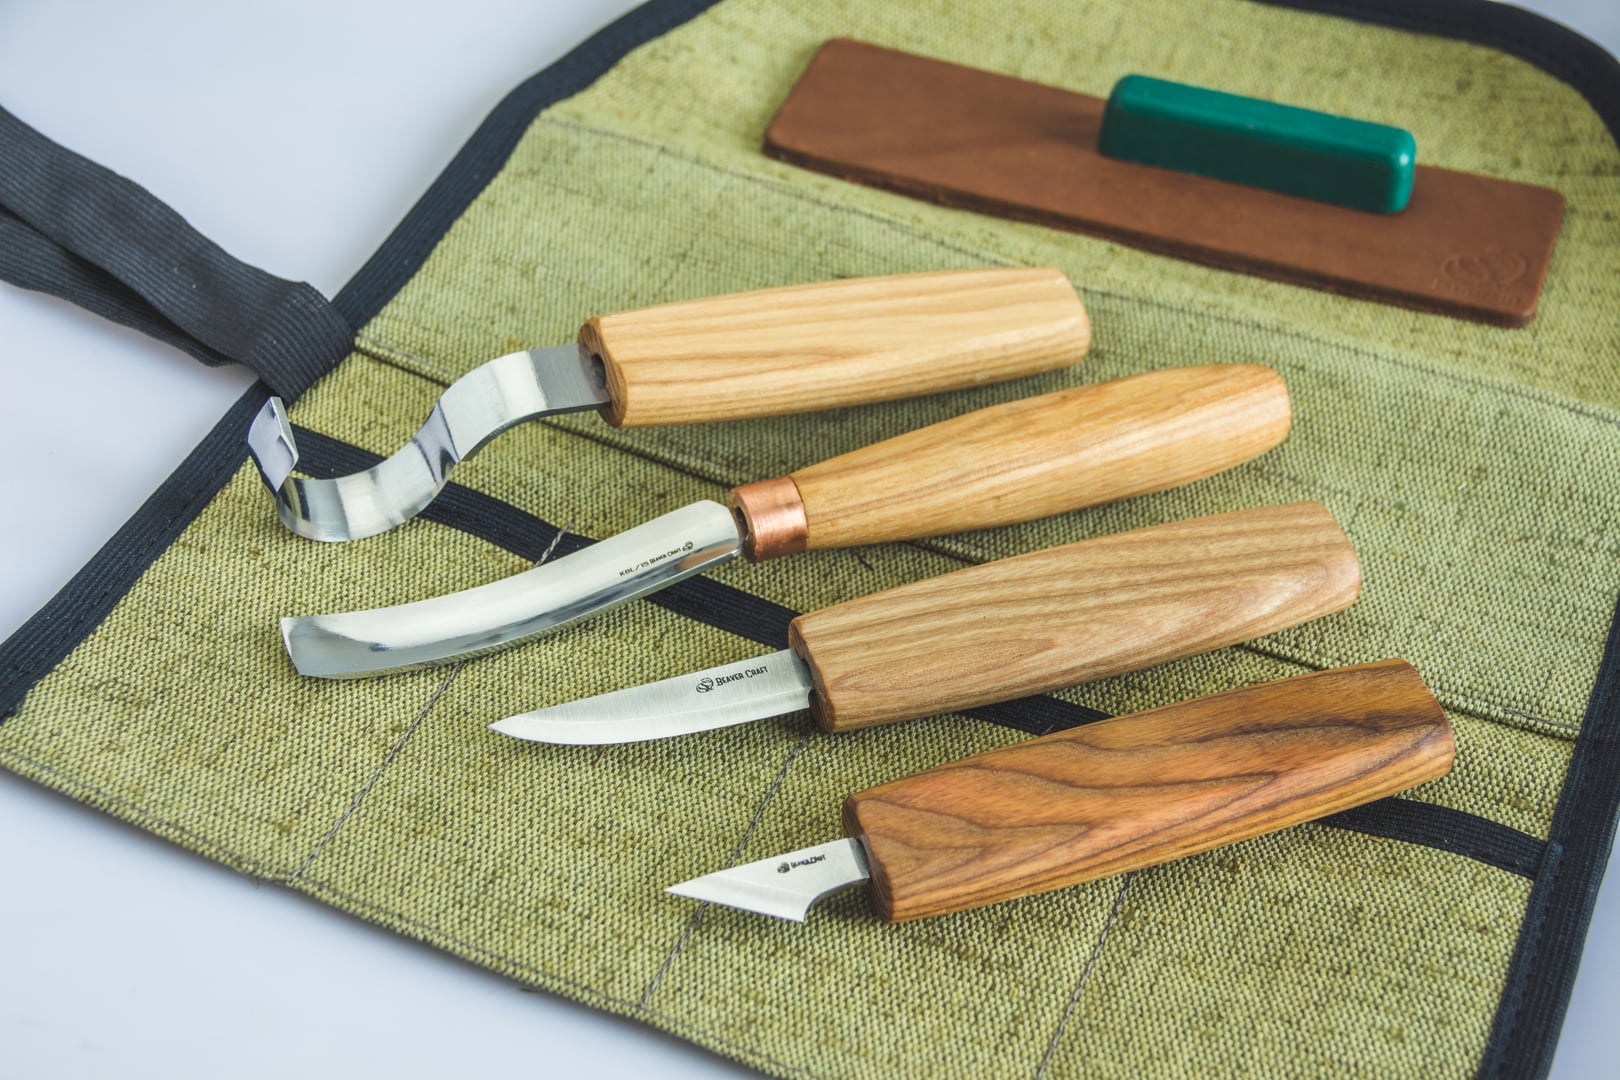 Timber Chisel Set №1 - The Spoon Crank